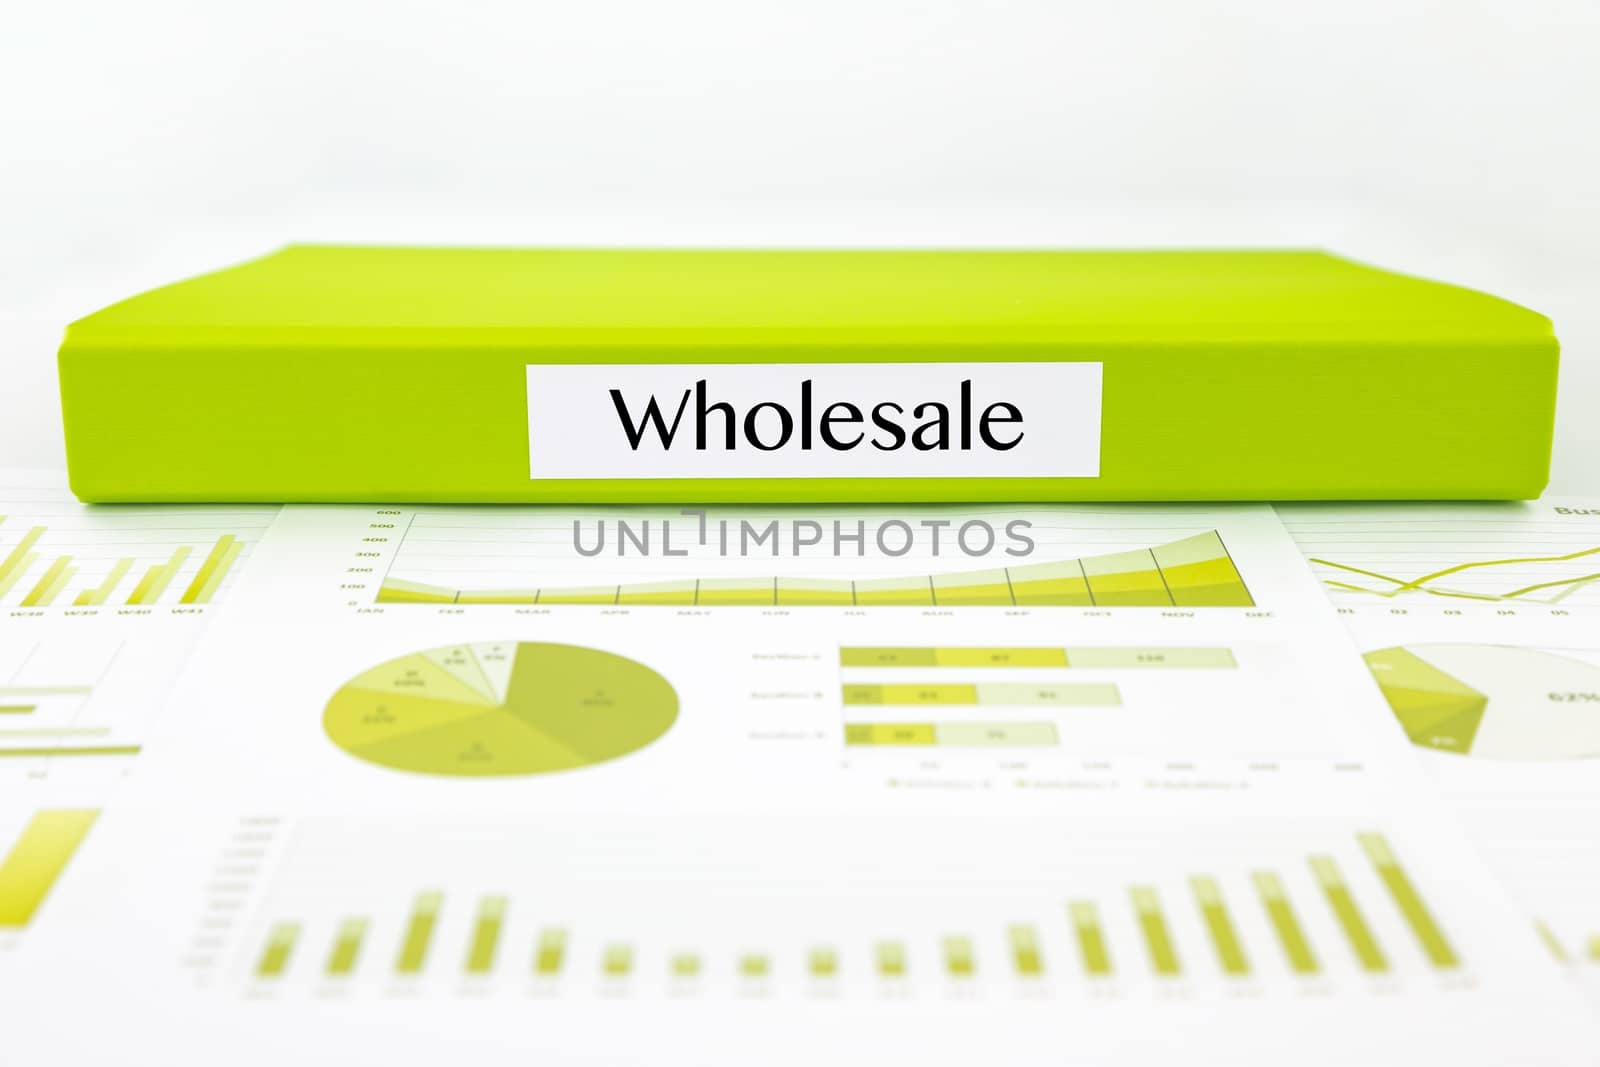 Wholesale documents, graphs analysis and marketing report by vinnstock